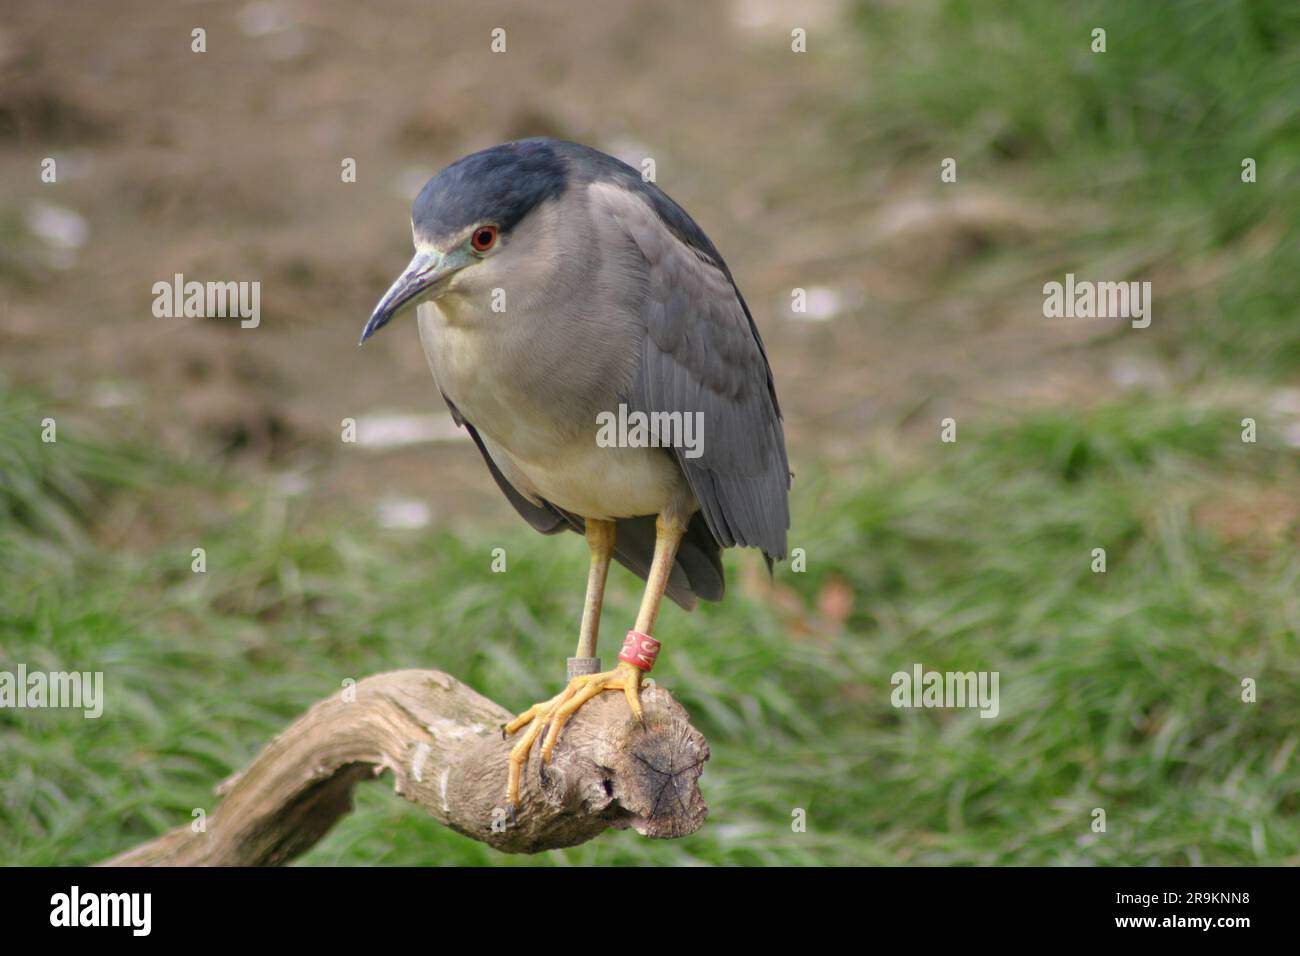 Black-crowned night heron (Nycticorax nycticorax), or black-capped night heron, usually shortened to just night heron in Zoo Zagreb,  07 Oct 2019 Stock Photo